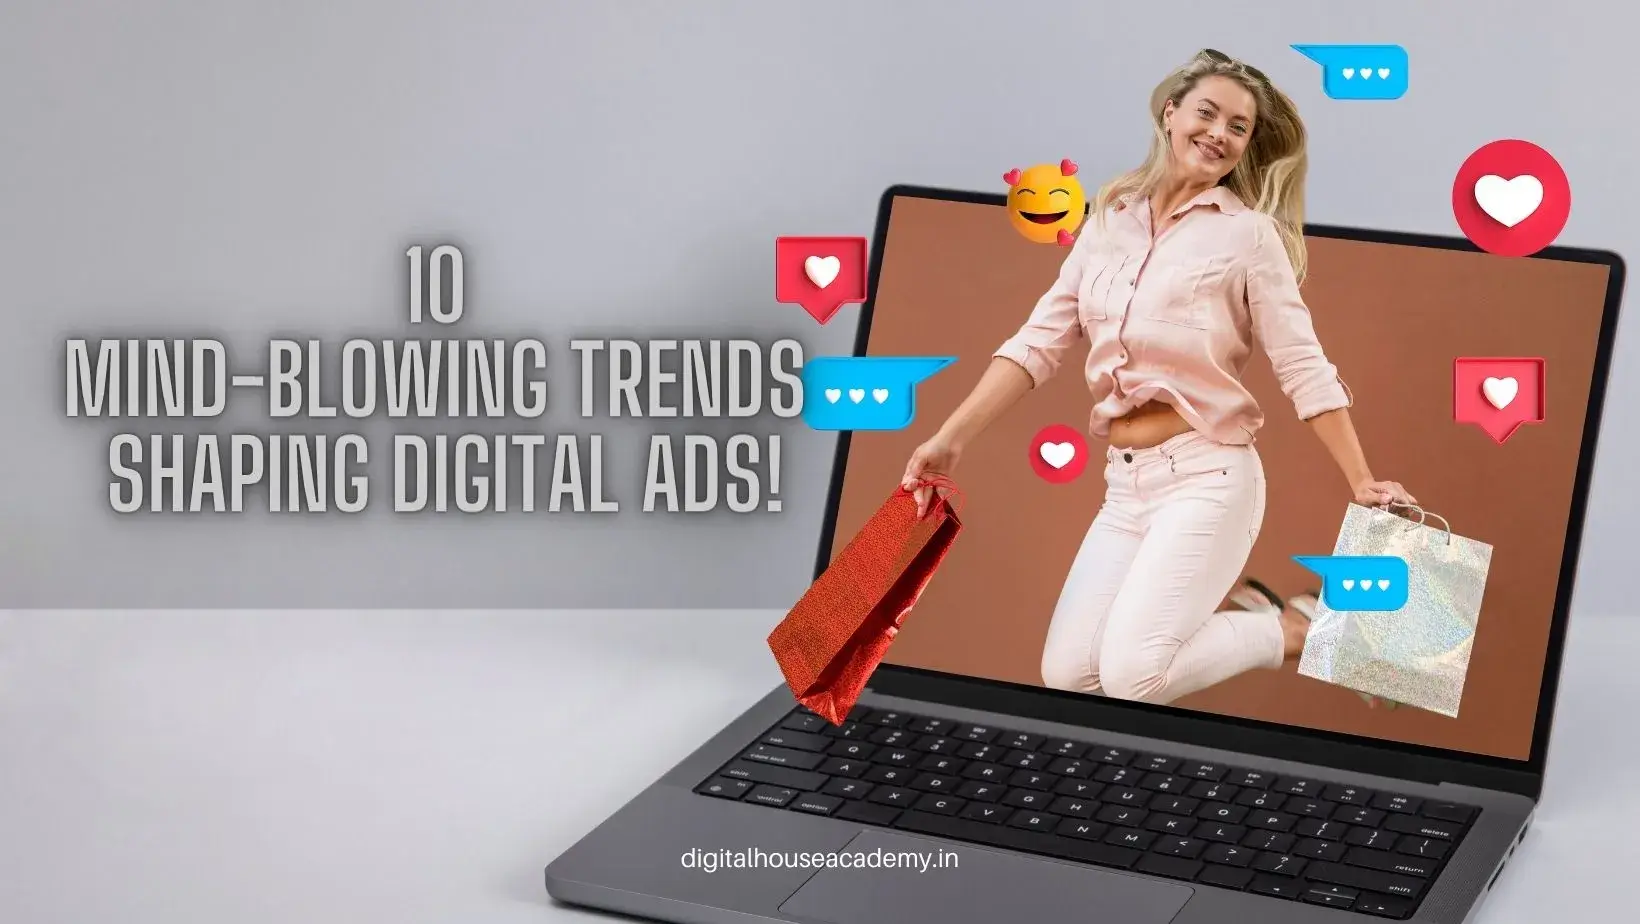 10 Mind-Blowing Trends Shaping Digital Ads!